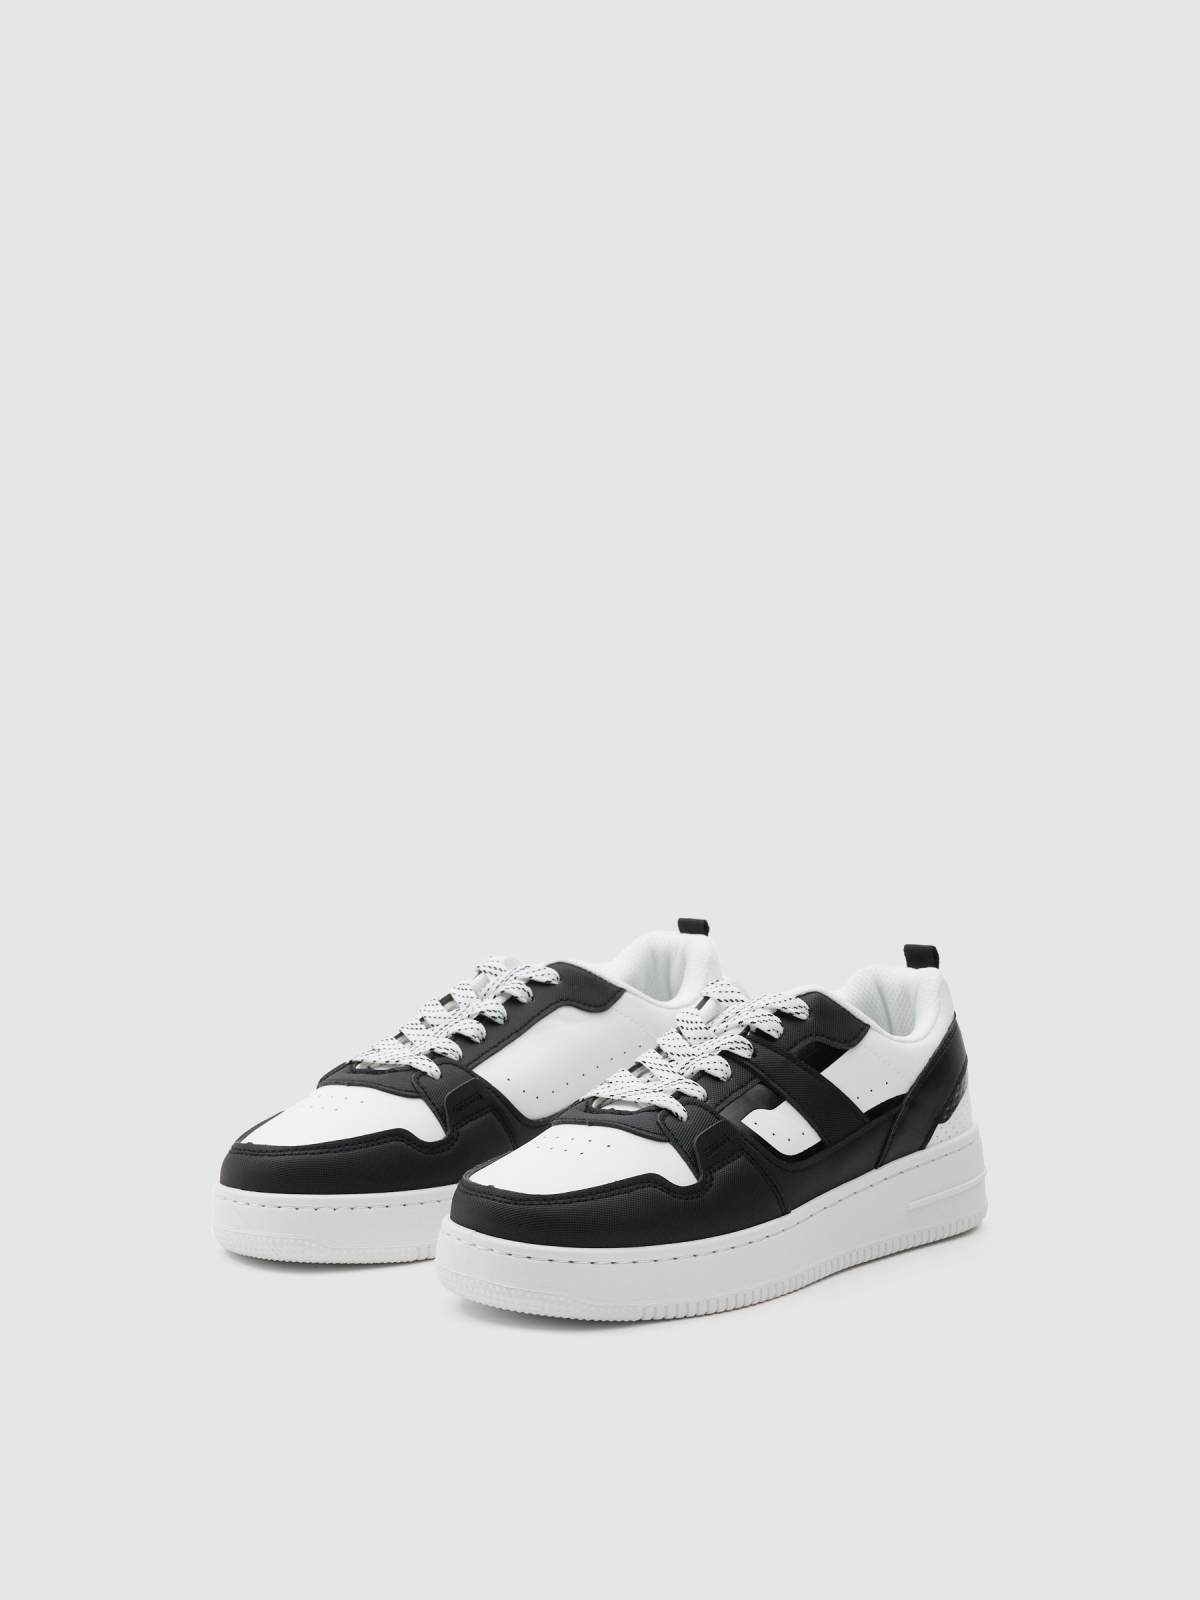 Black and white skater sneakers white 45º front view